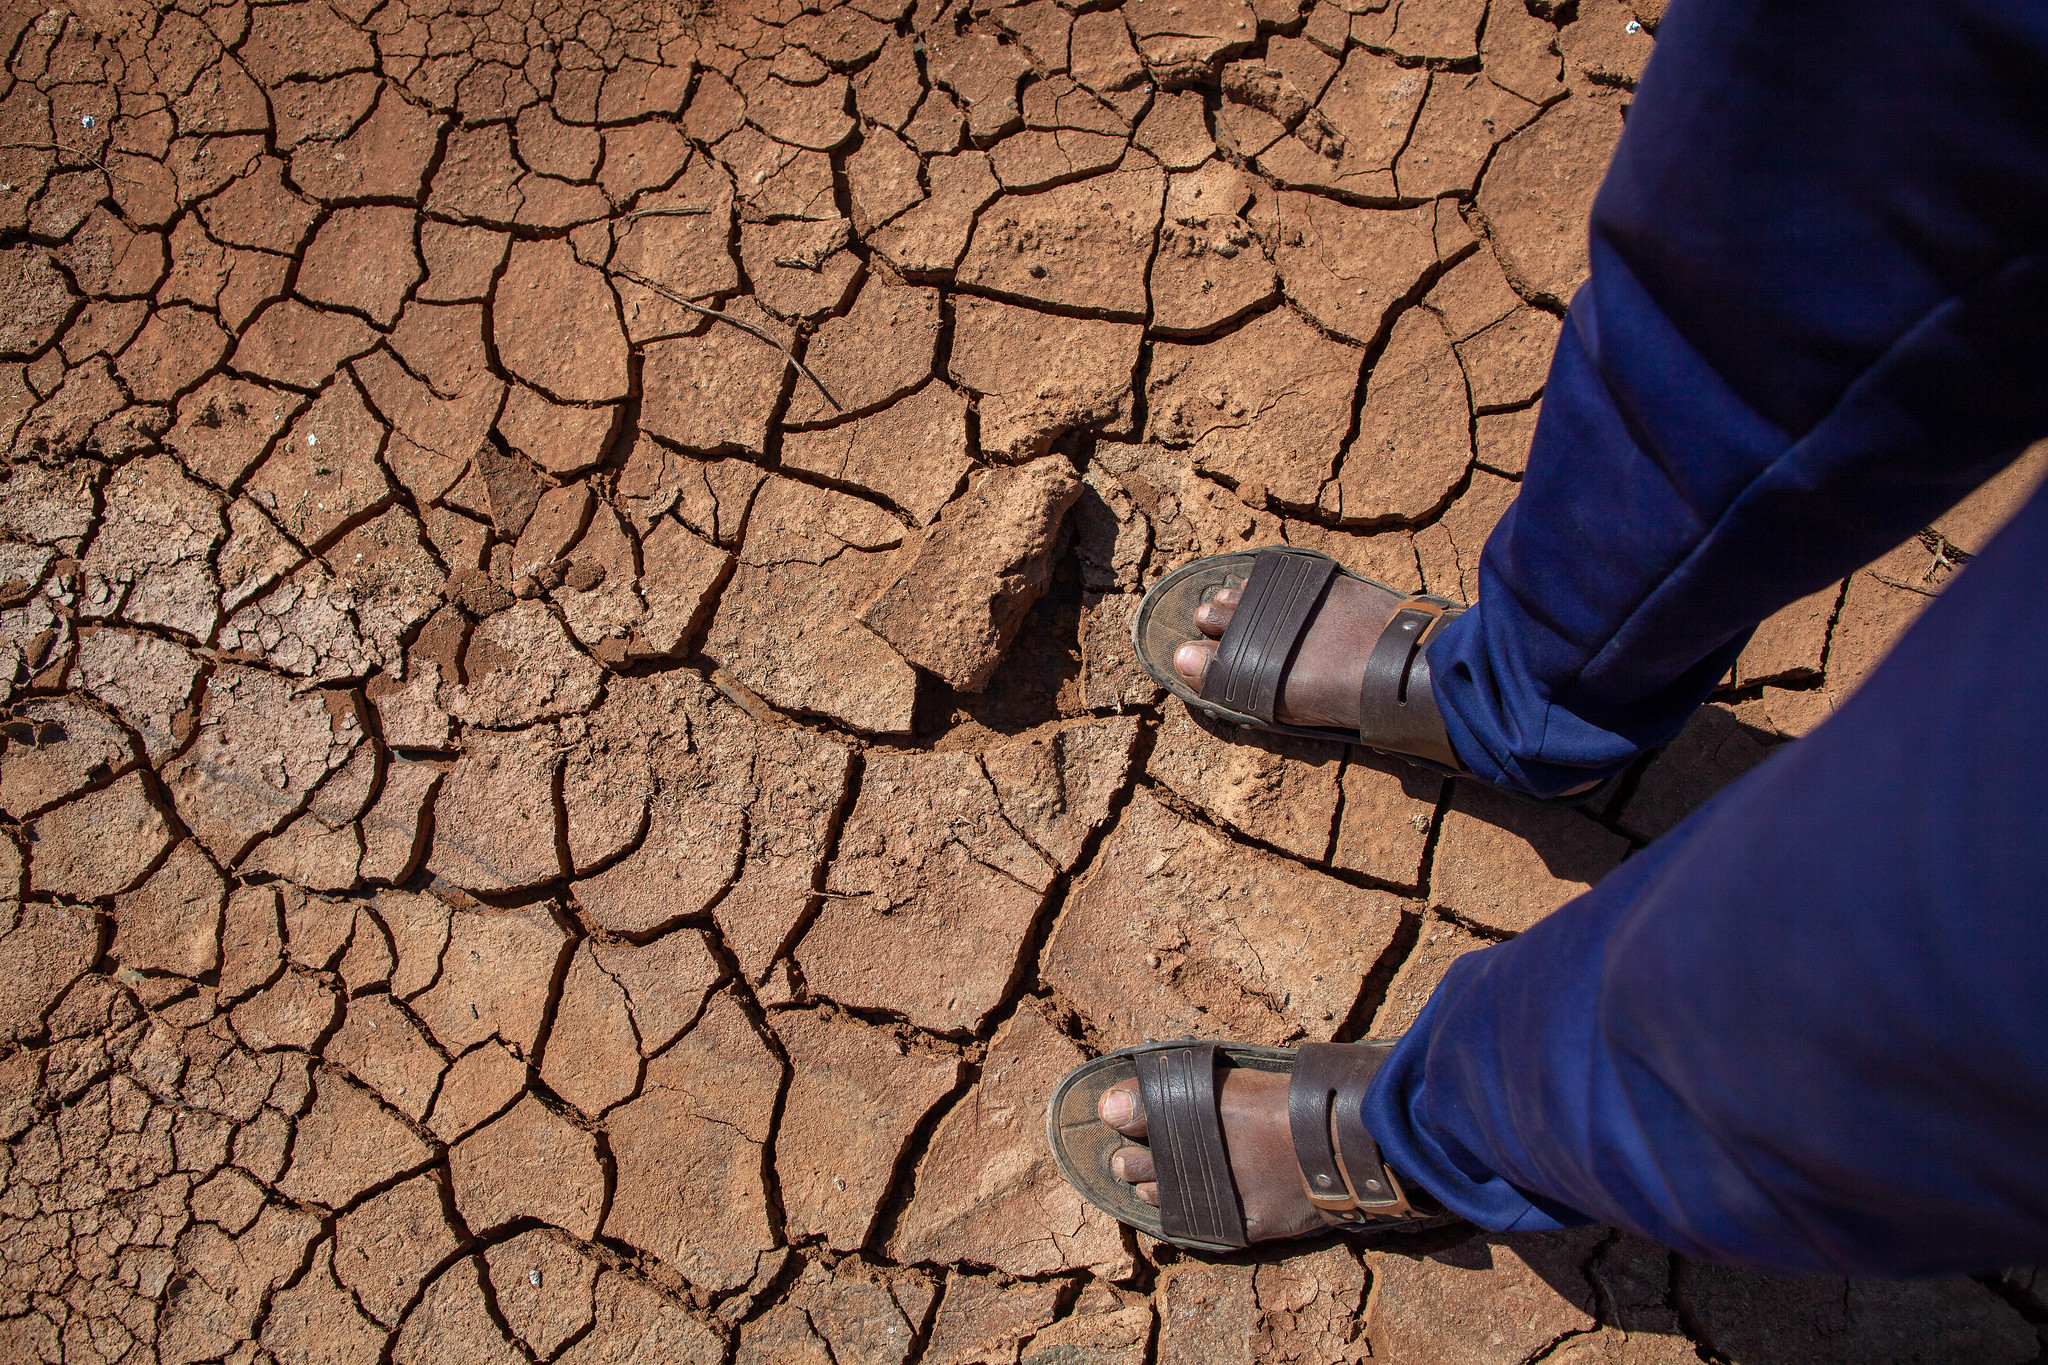 Man standing on the cracked ground